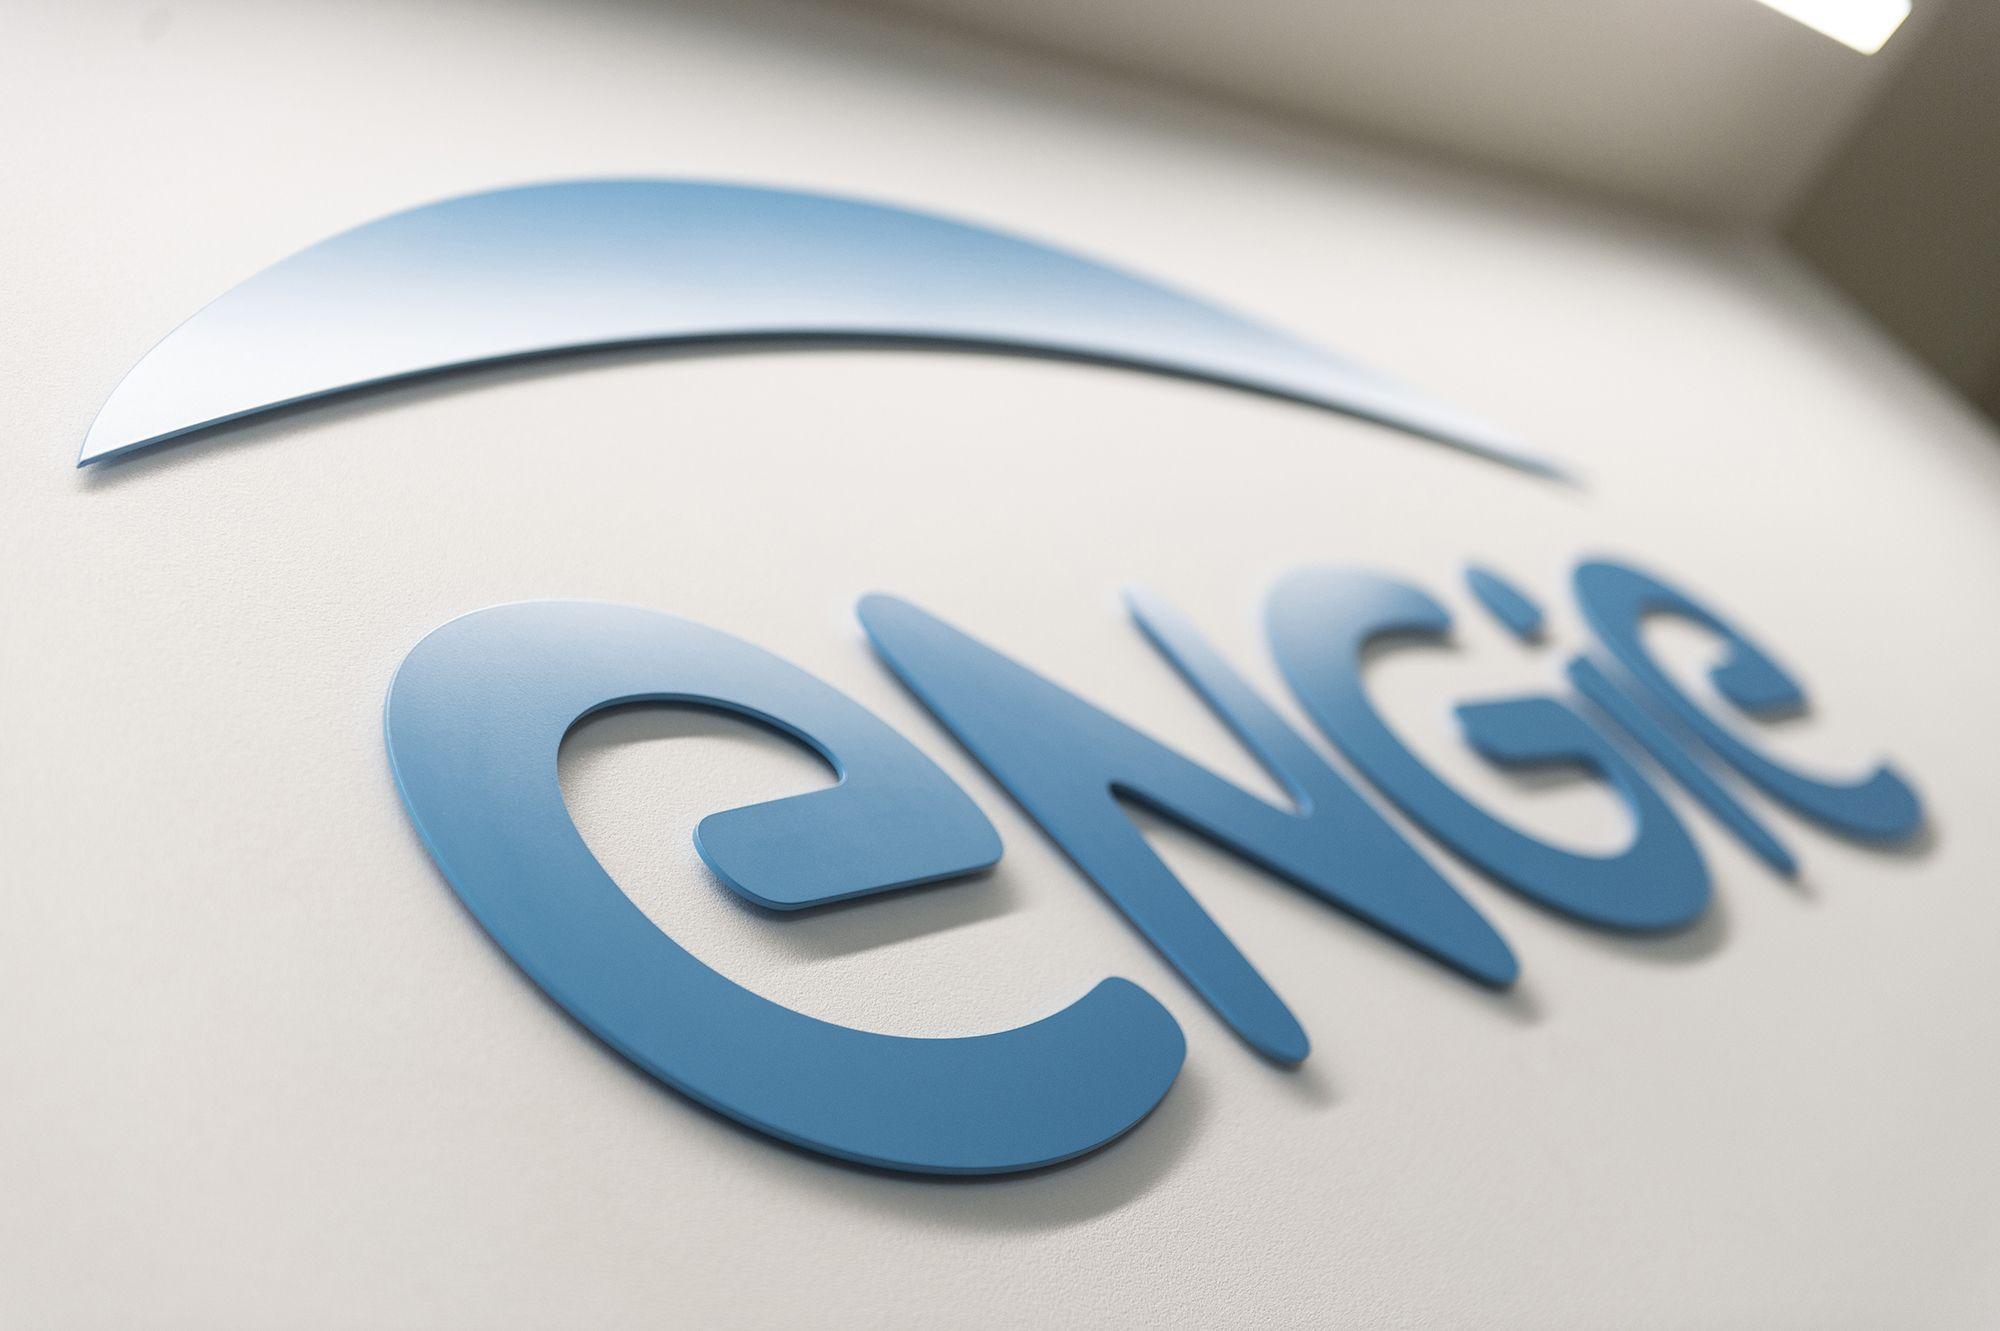 Engie Logo - Engie inaugurates second largest heat network in France - Power ...